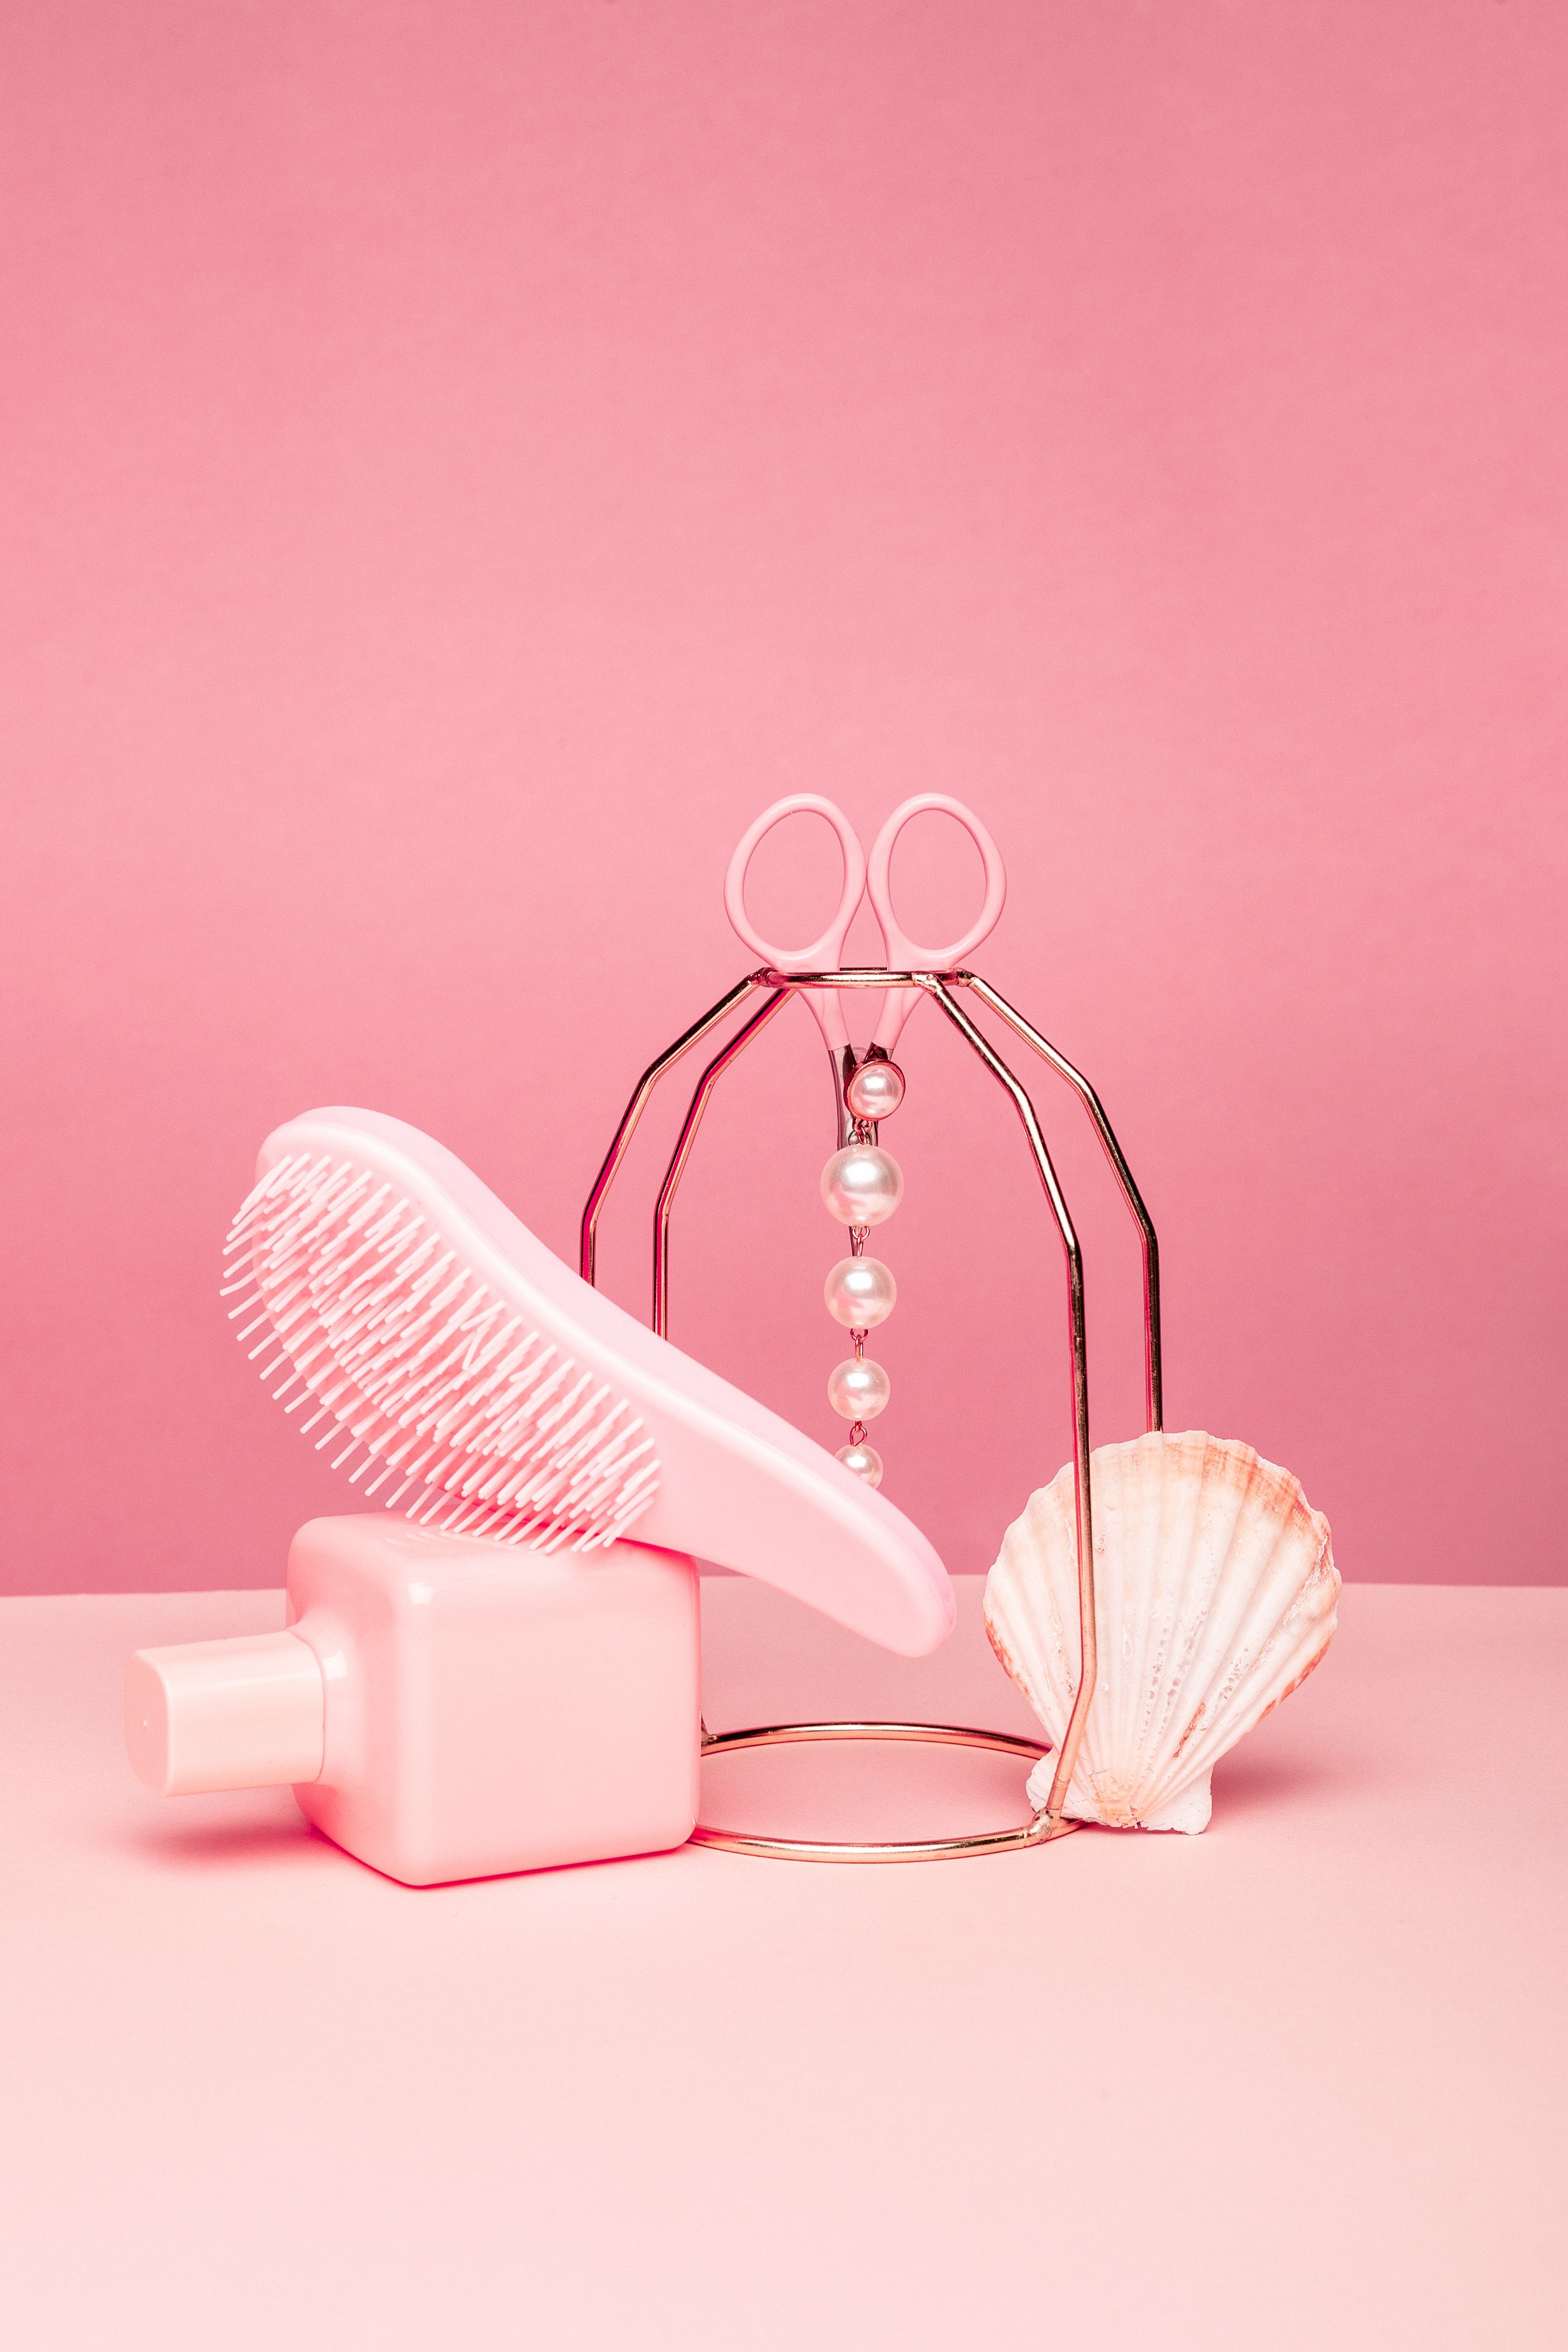 The image features various beauty products arranged against a pink background. - Danish